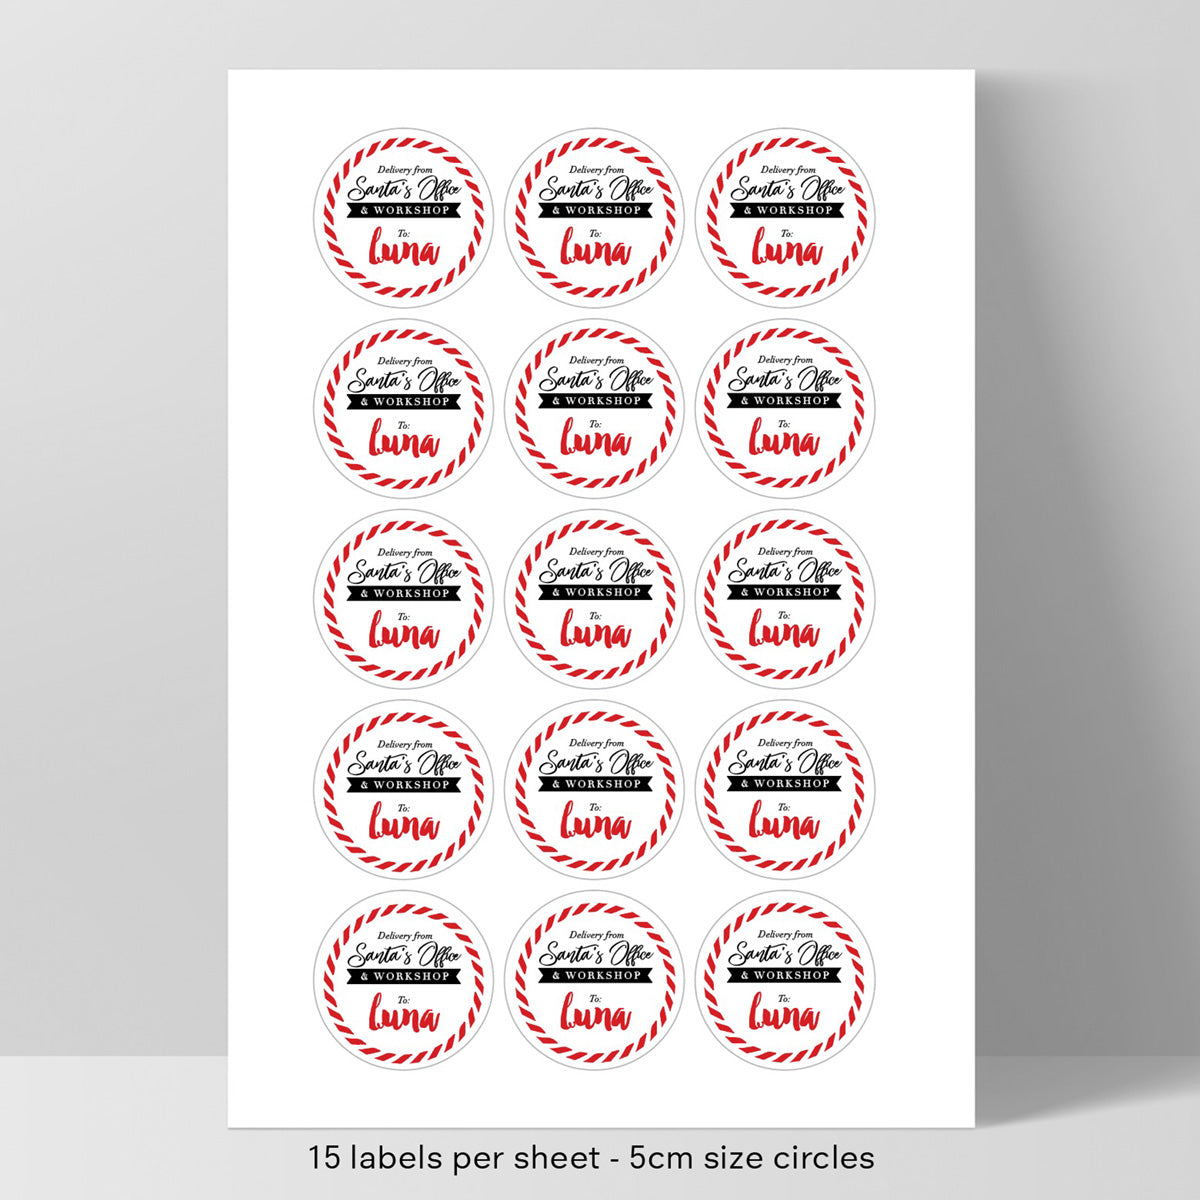 Round Christmas Gift Sticker Labels for Kids or Family, Customised with your names - shown 15 up on an A4 sheet 